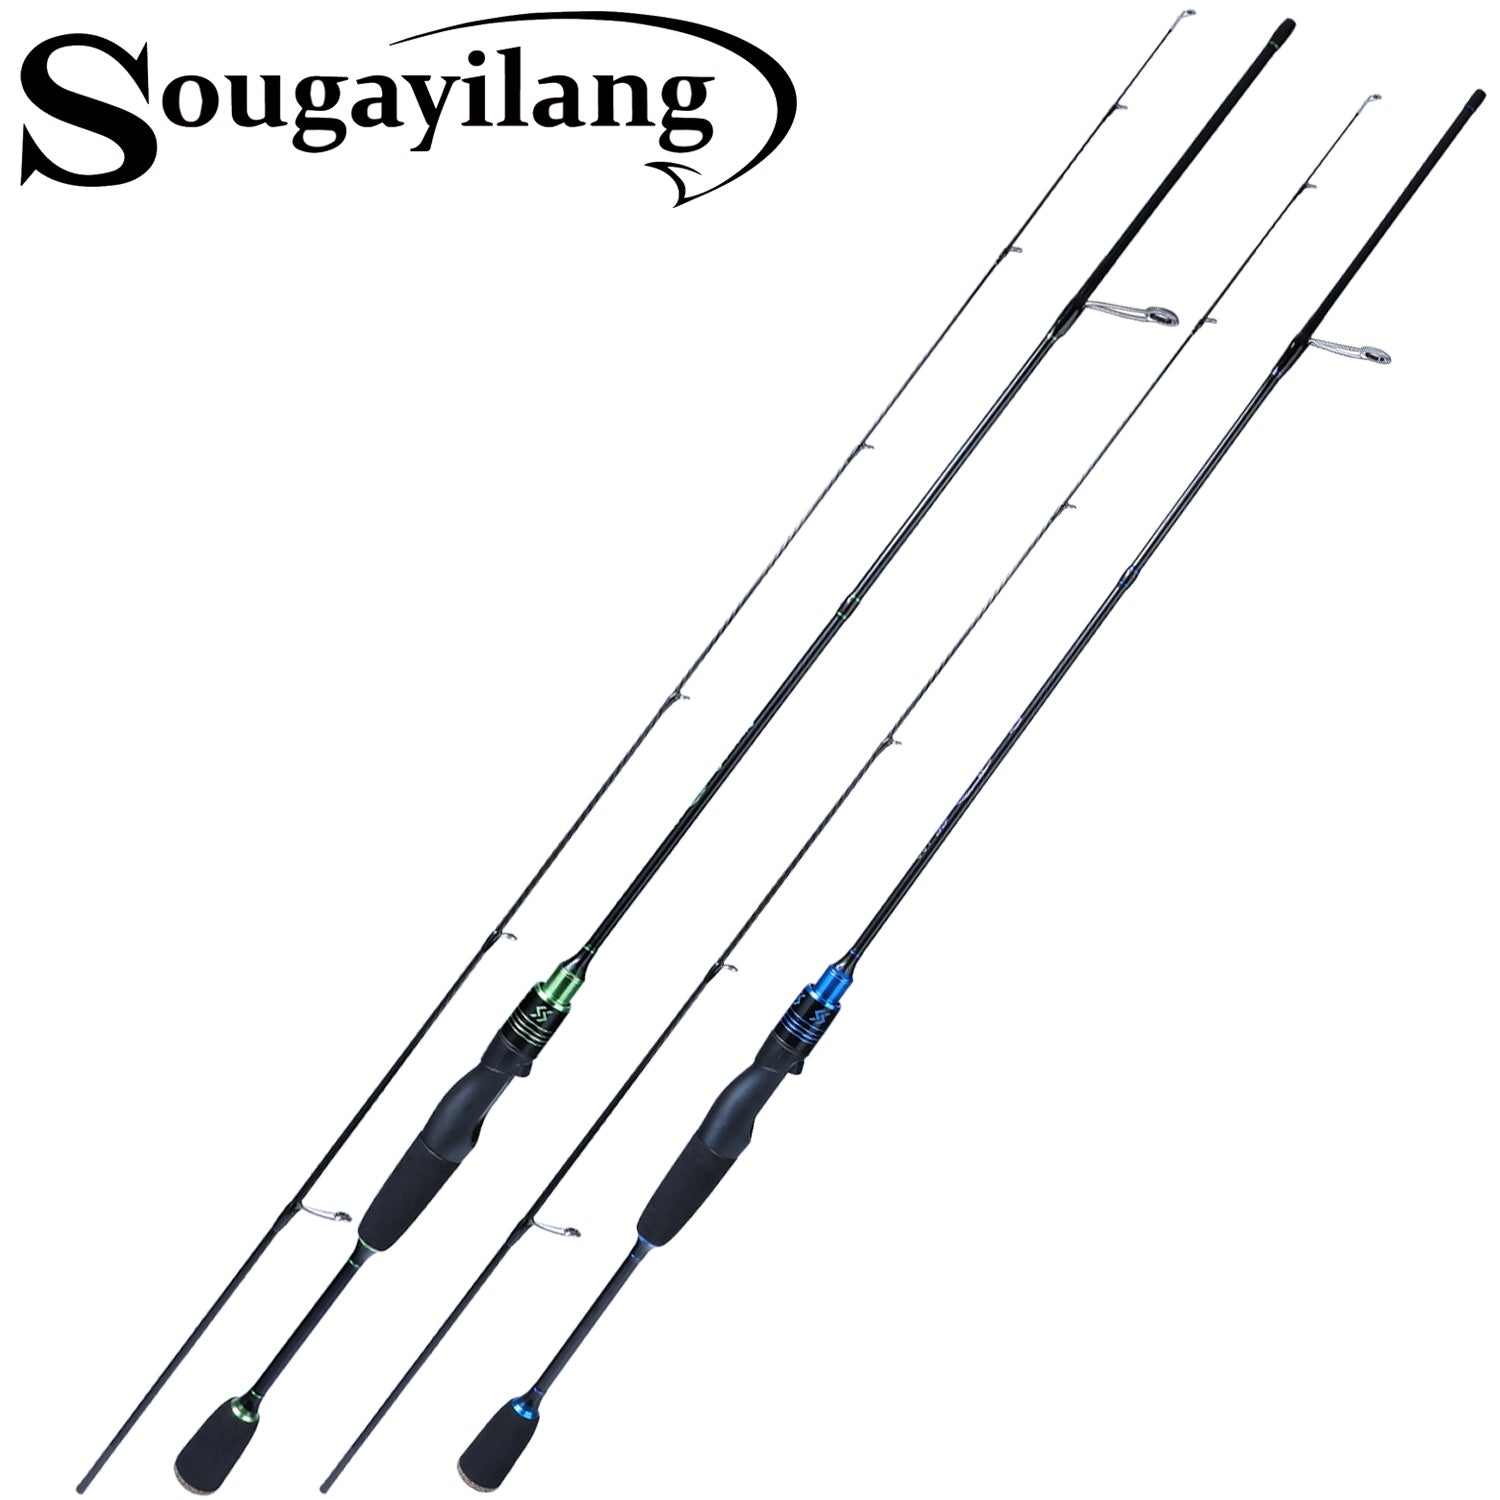  Sougayilang Slow Pitch Jigging Rod, 40 Ton Carbon Fiber Blank,  2-Piece Casting Rod for Snapper, Grouper and Tuna : Sports & Outdoors